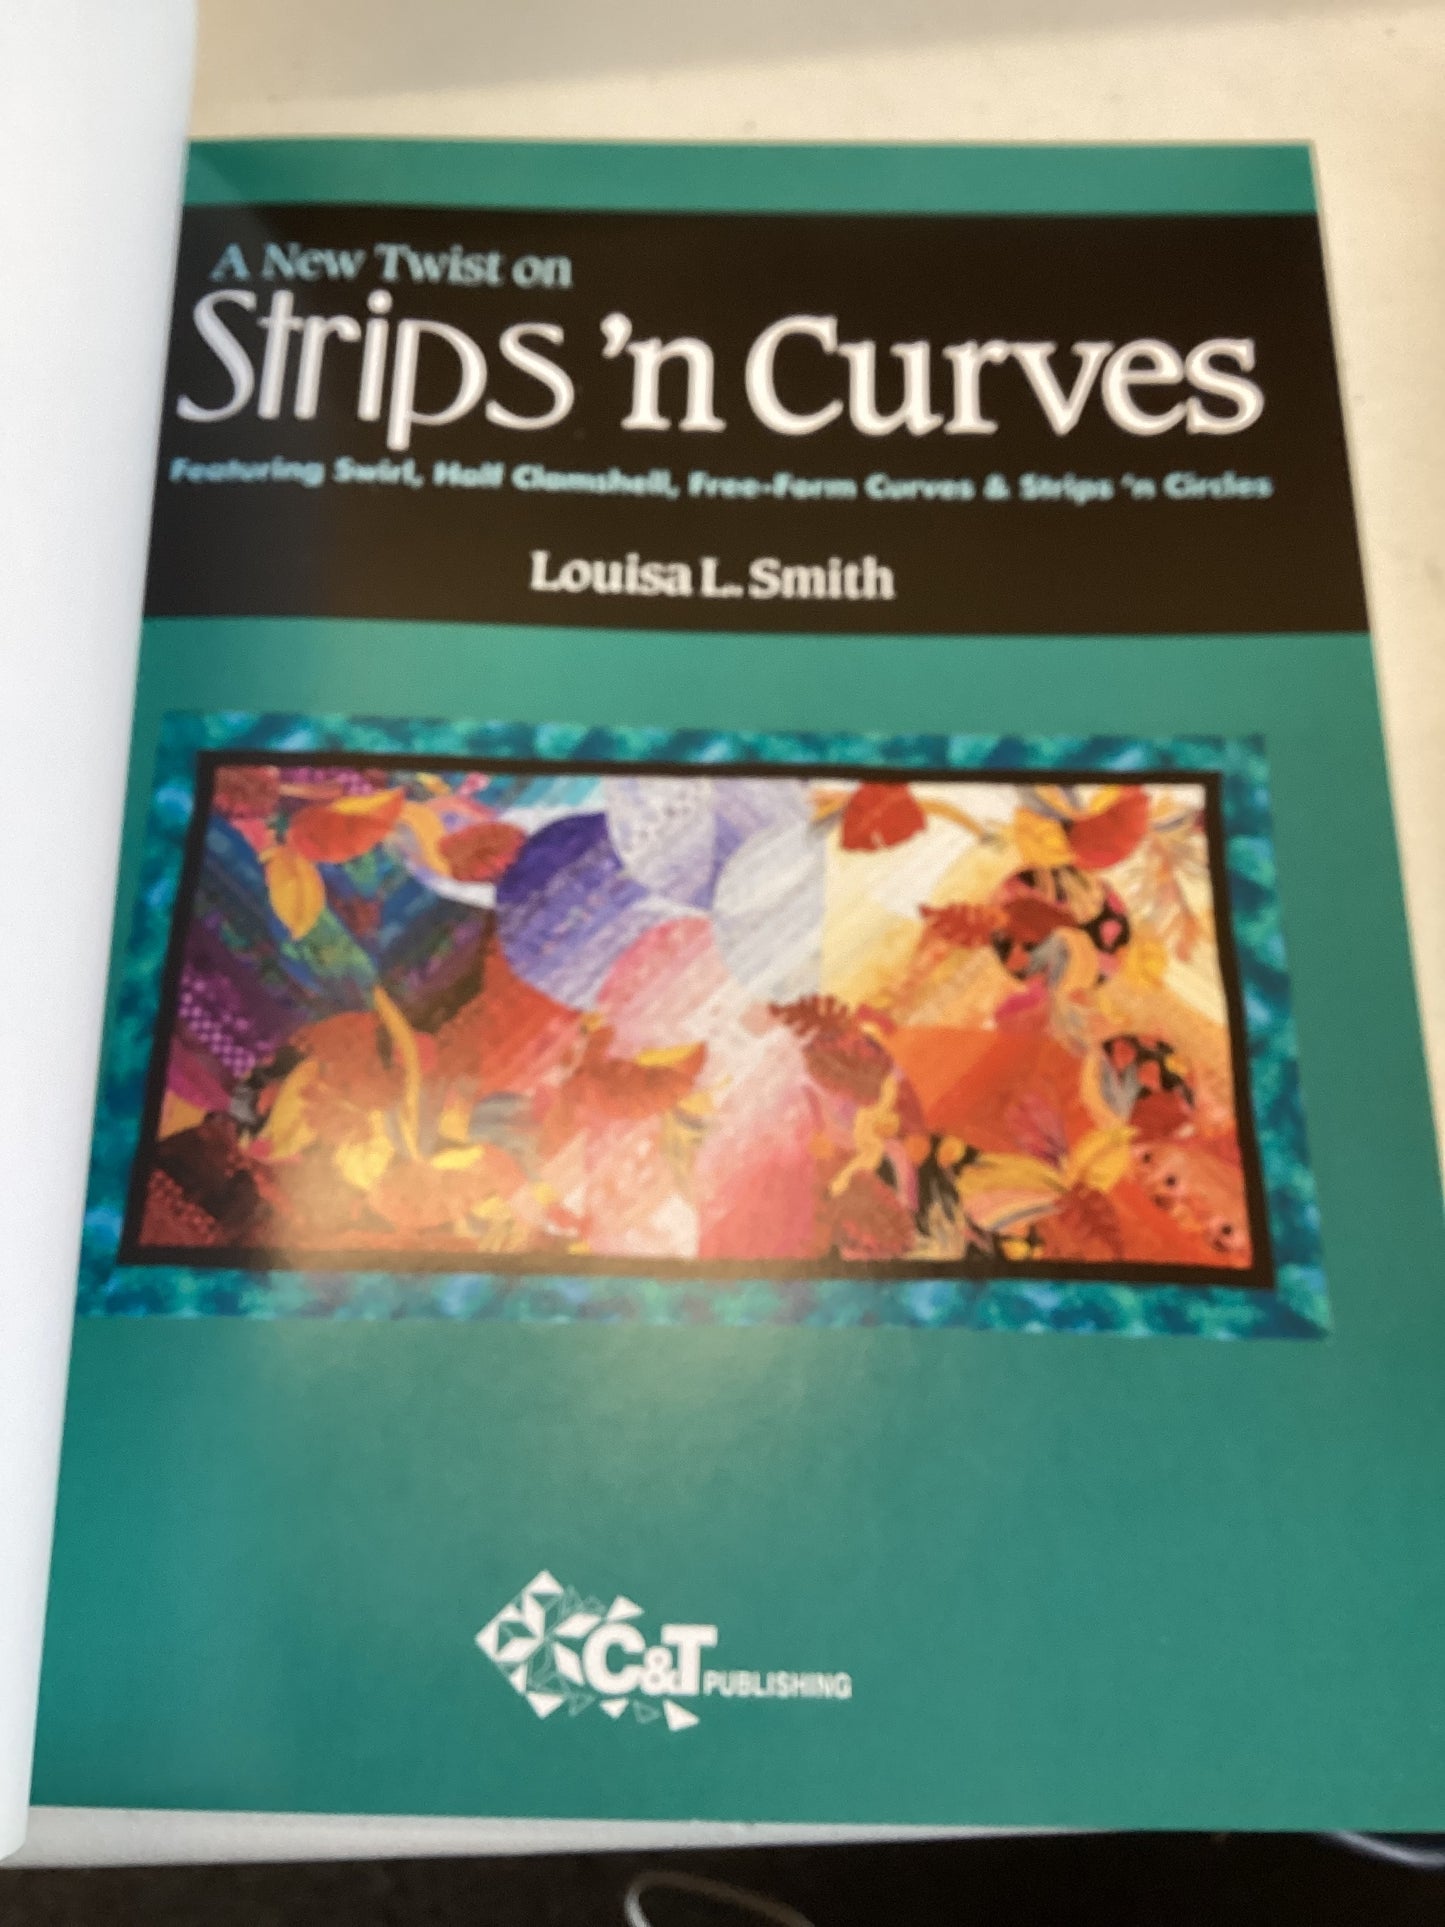 A New Twist on Strips'N Curves Featuring Swirl, Half Clamshell, Free-Form Curfves & Strips'n Circles Louisa L Smith